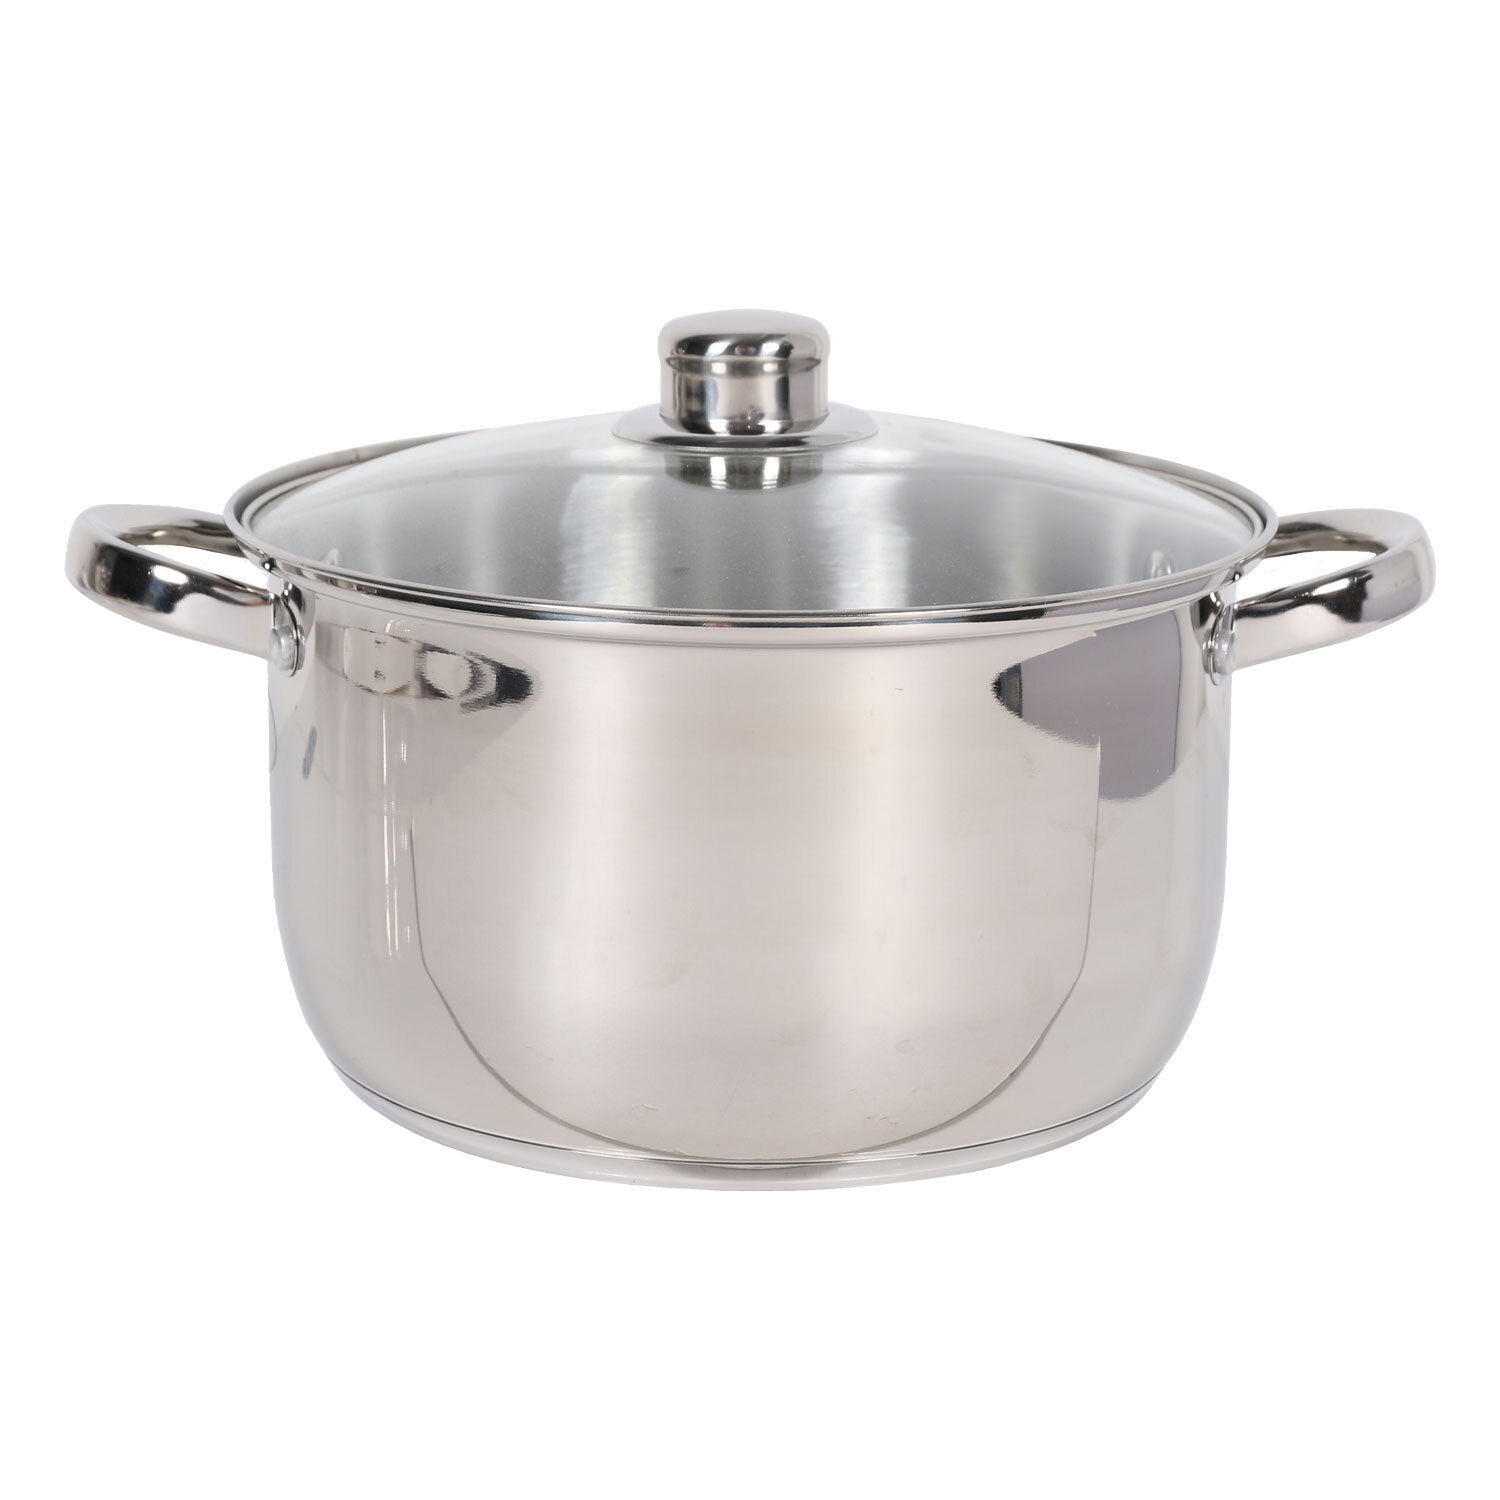 24cm Stainless Steel Stockpot Image